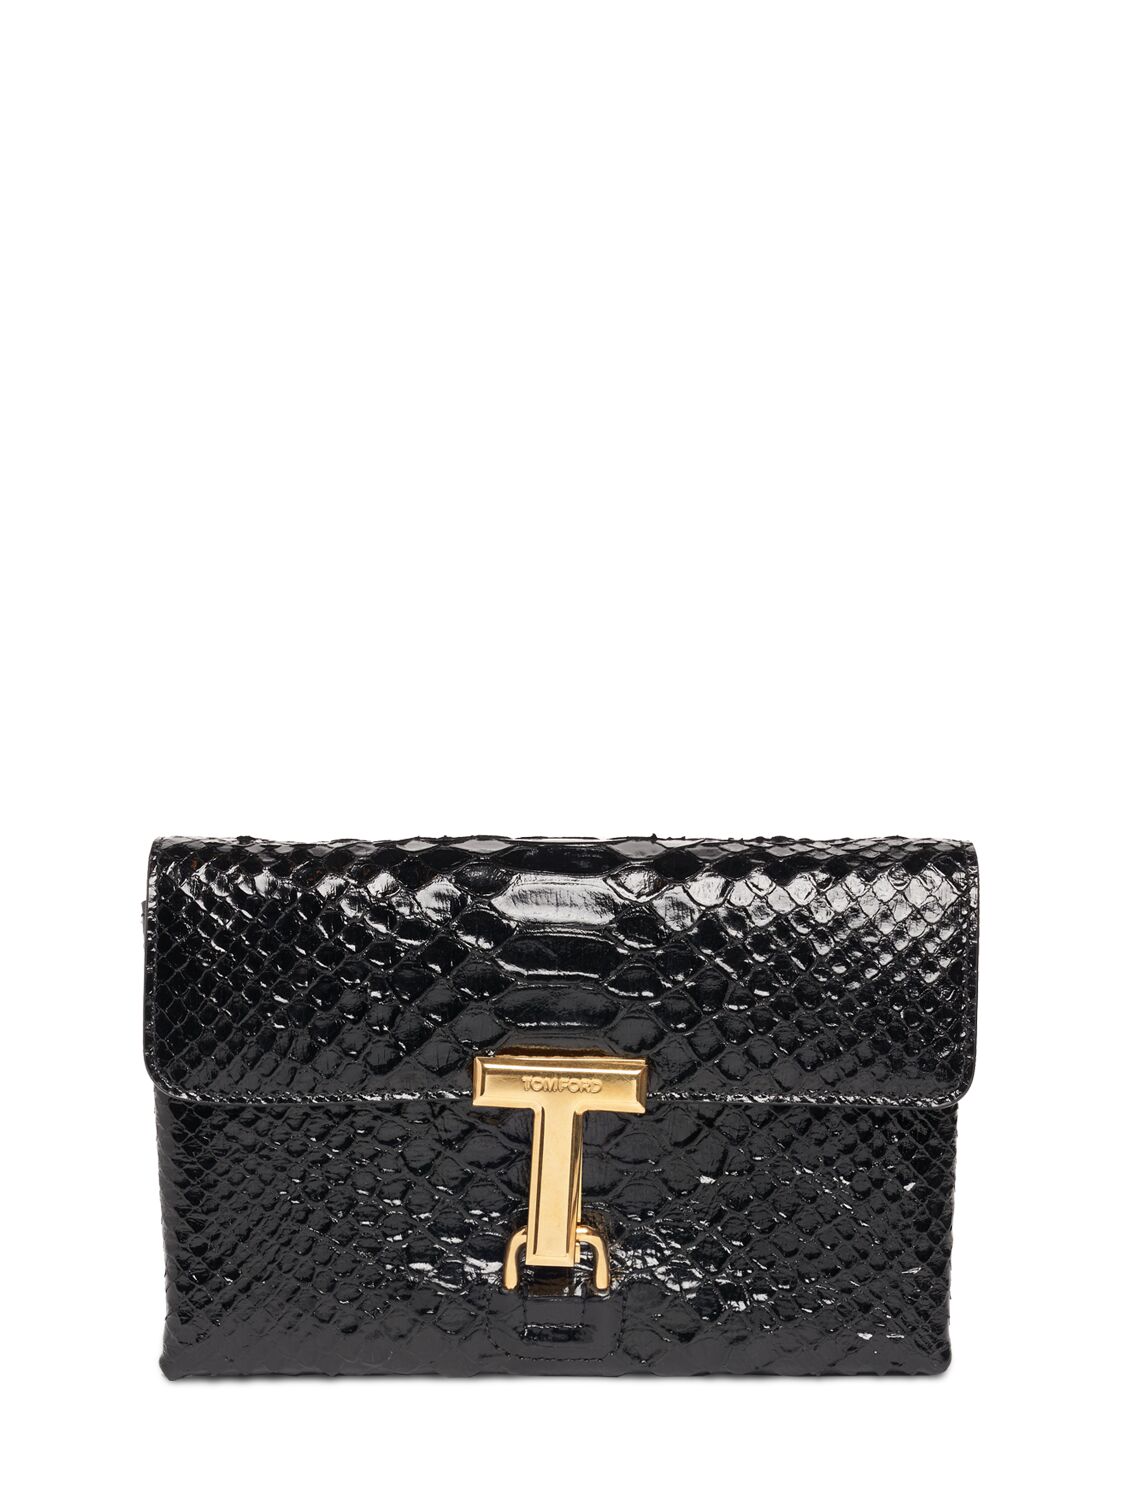 Mini Monarch Glossy Embossed Leather Bag